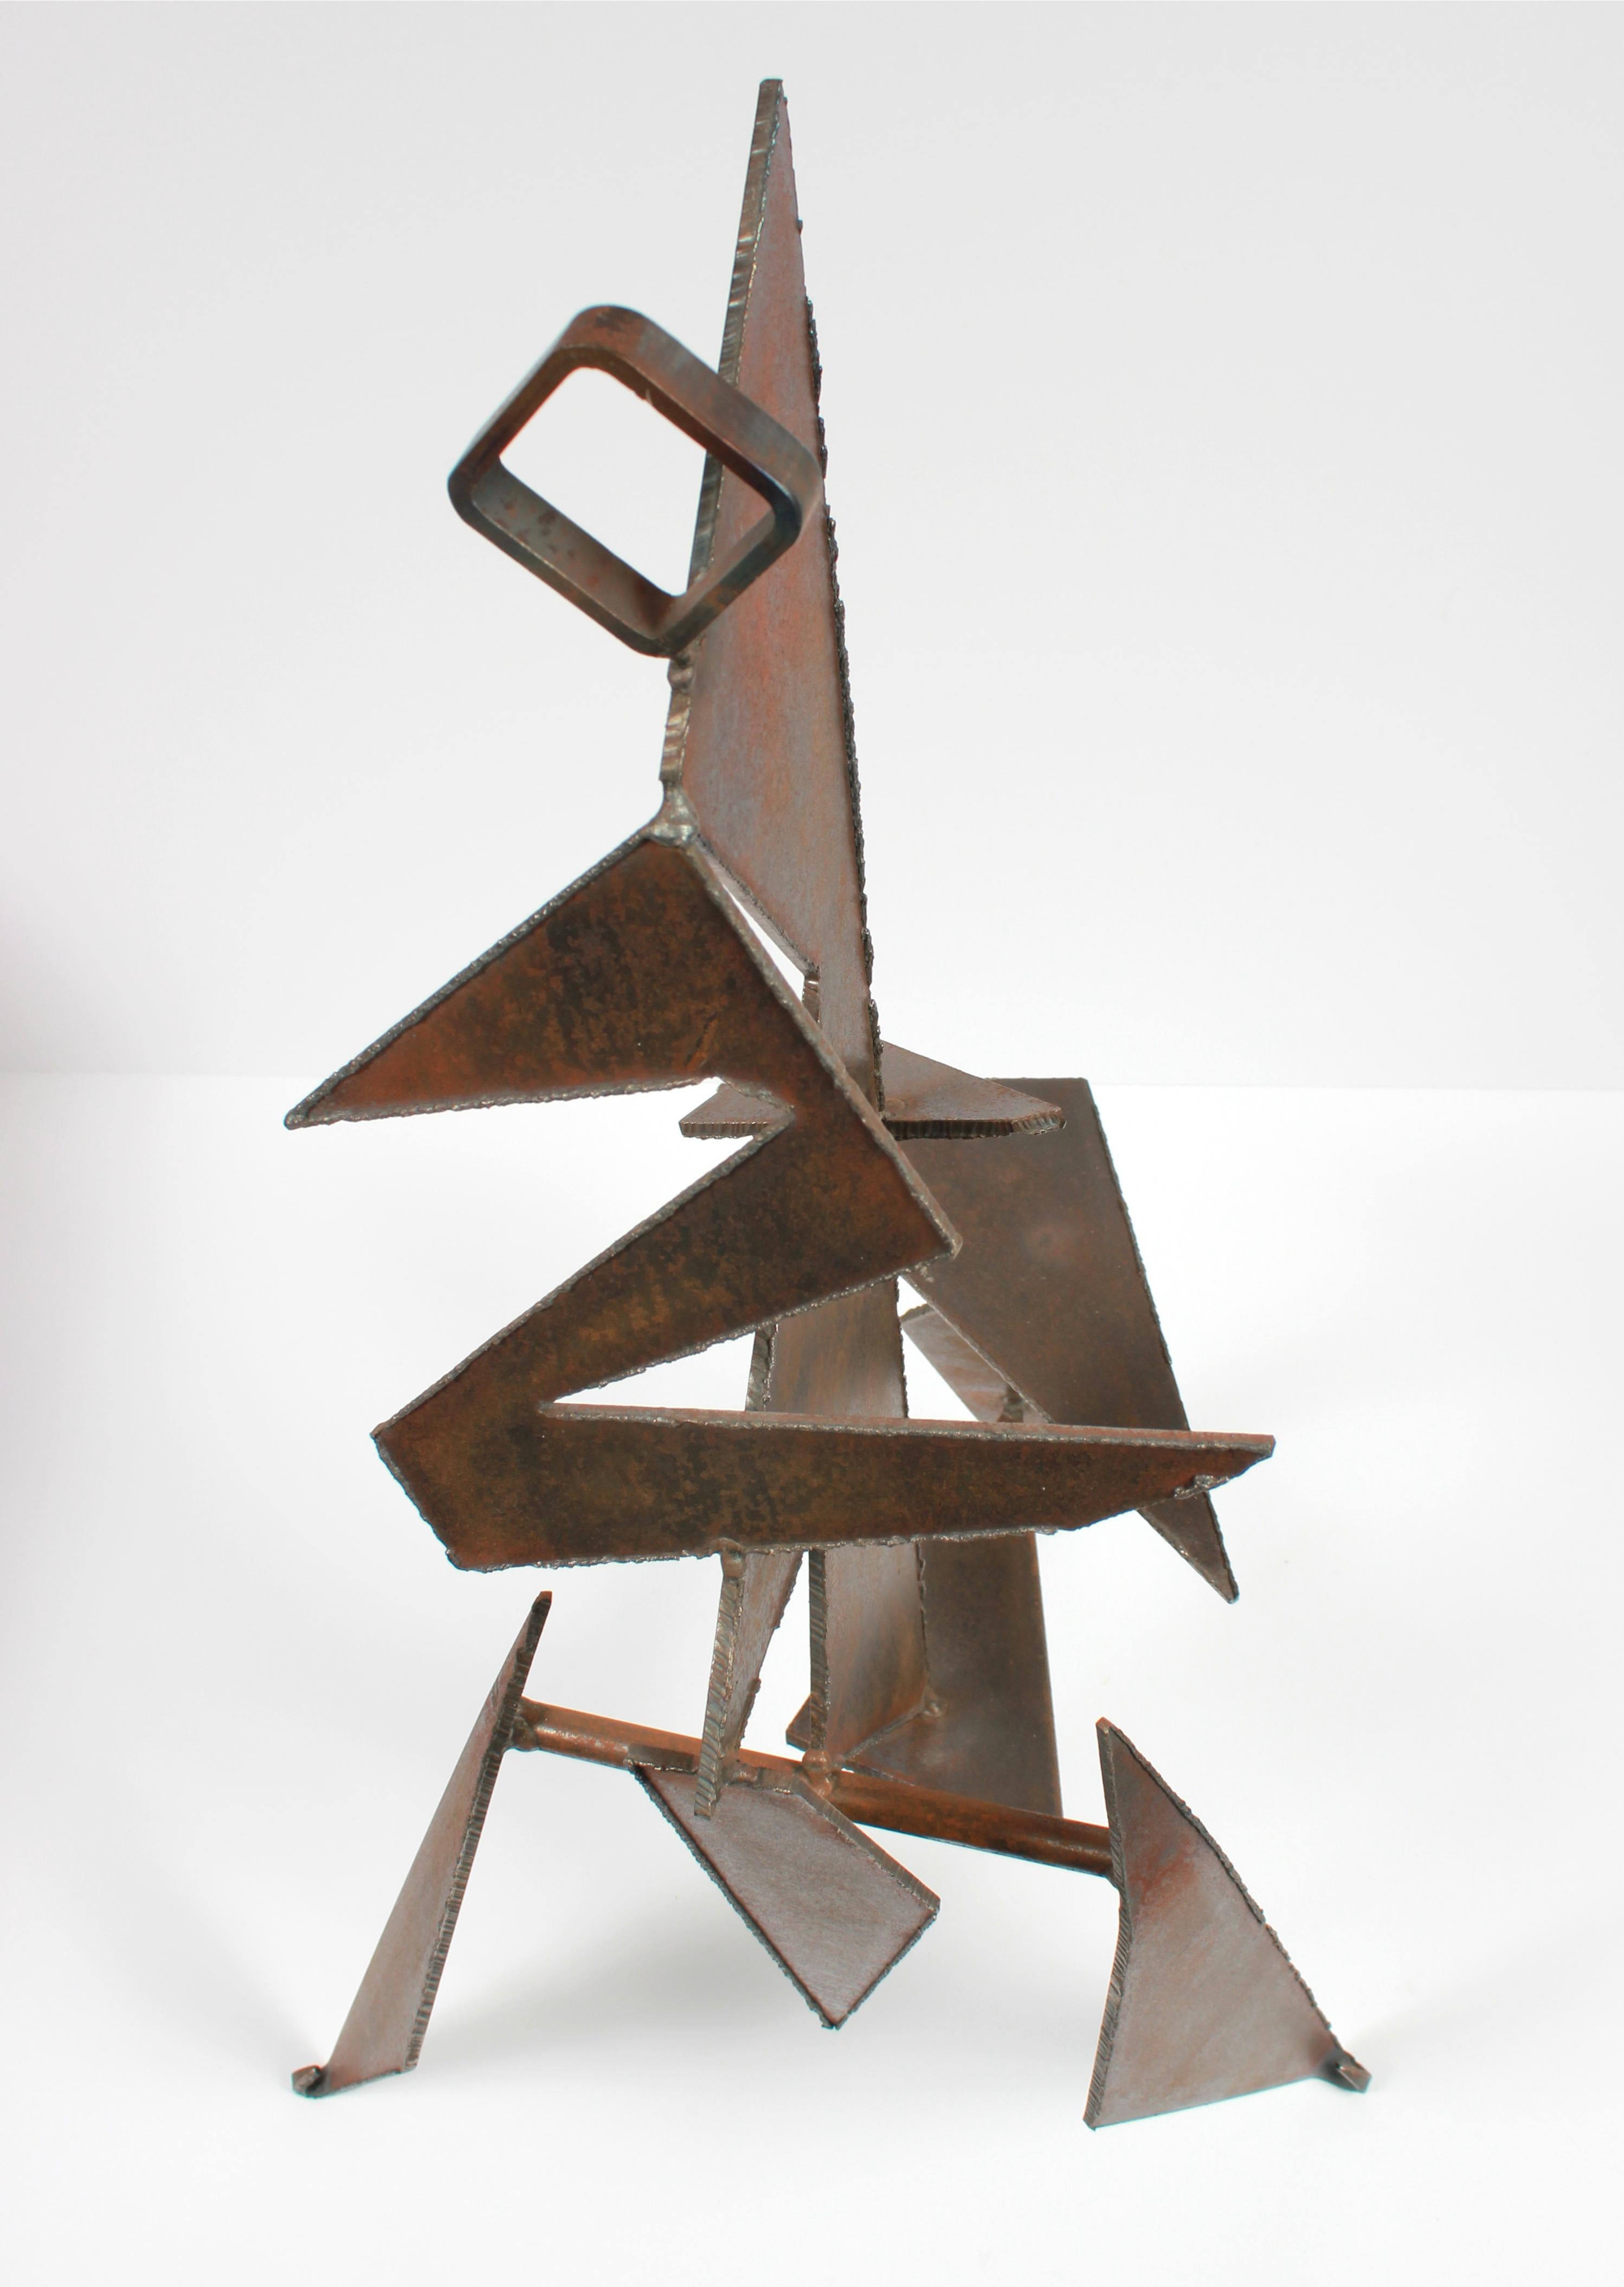 20th Century Angular Geometric Standing Form in Welded Steel Sculpture - Gray Figurative Sculpture by Unknown